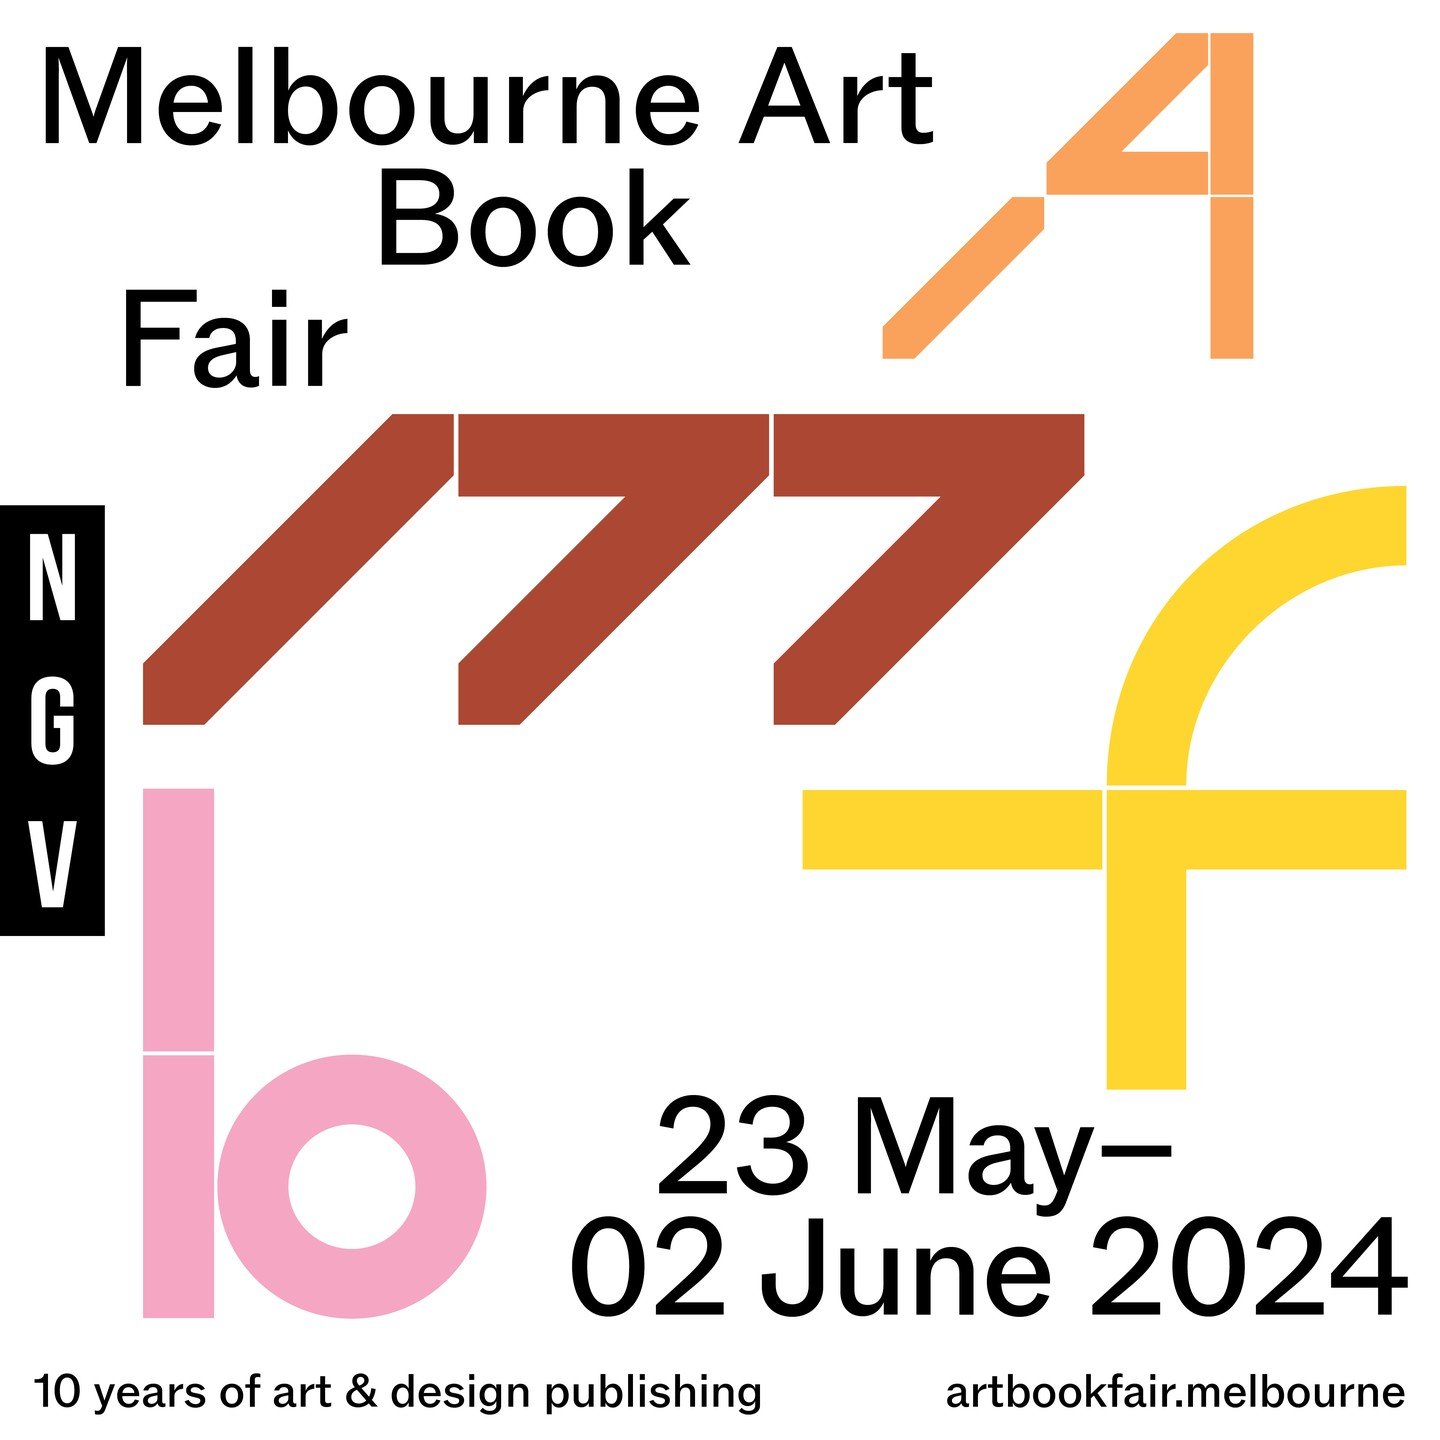 Looking forward to the upcoming artbookfair.melbourne at the NGV. We'll be tabling on May 26th. 

We are also running Intro to Riso workshops from the 23 May to 2 June as part of the events program. These workshops will be at our Nicholas building sp